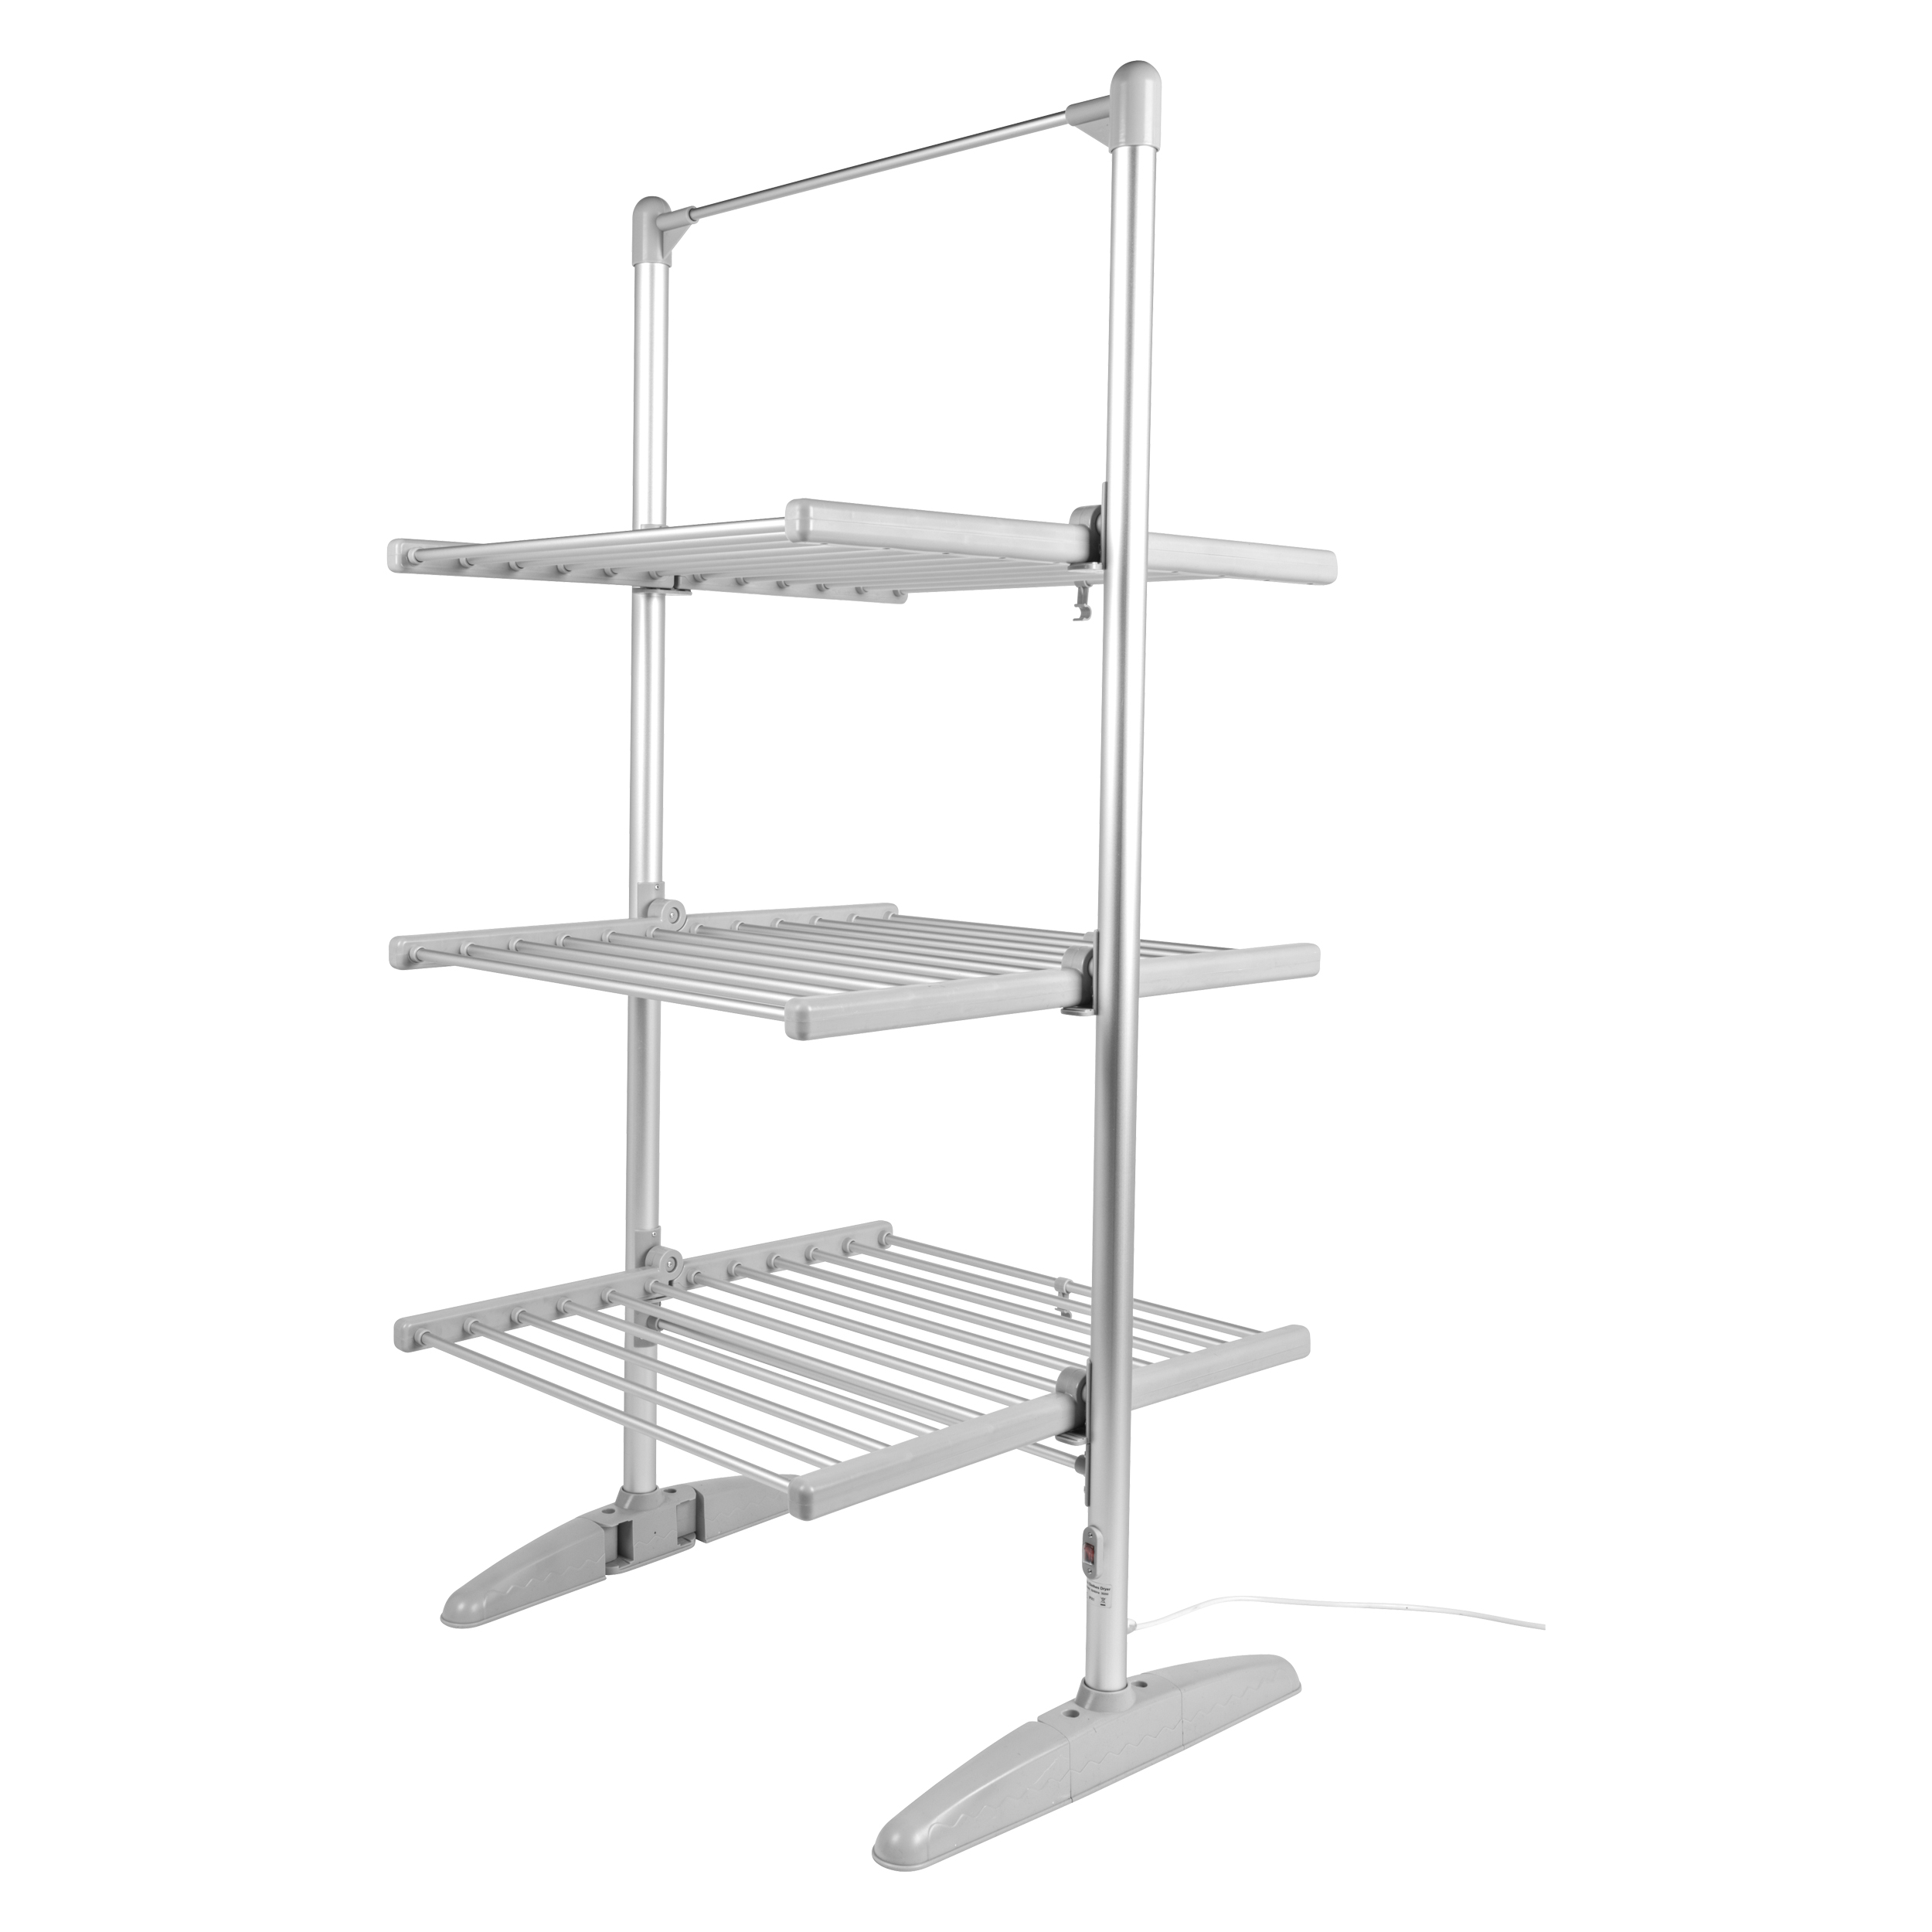 Shop Beldray Round Heated Airer, Holds 10kg, 6 Arm